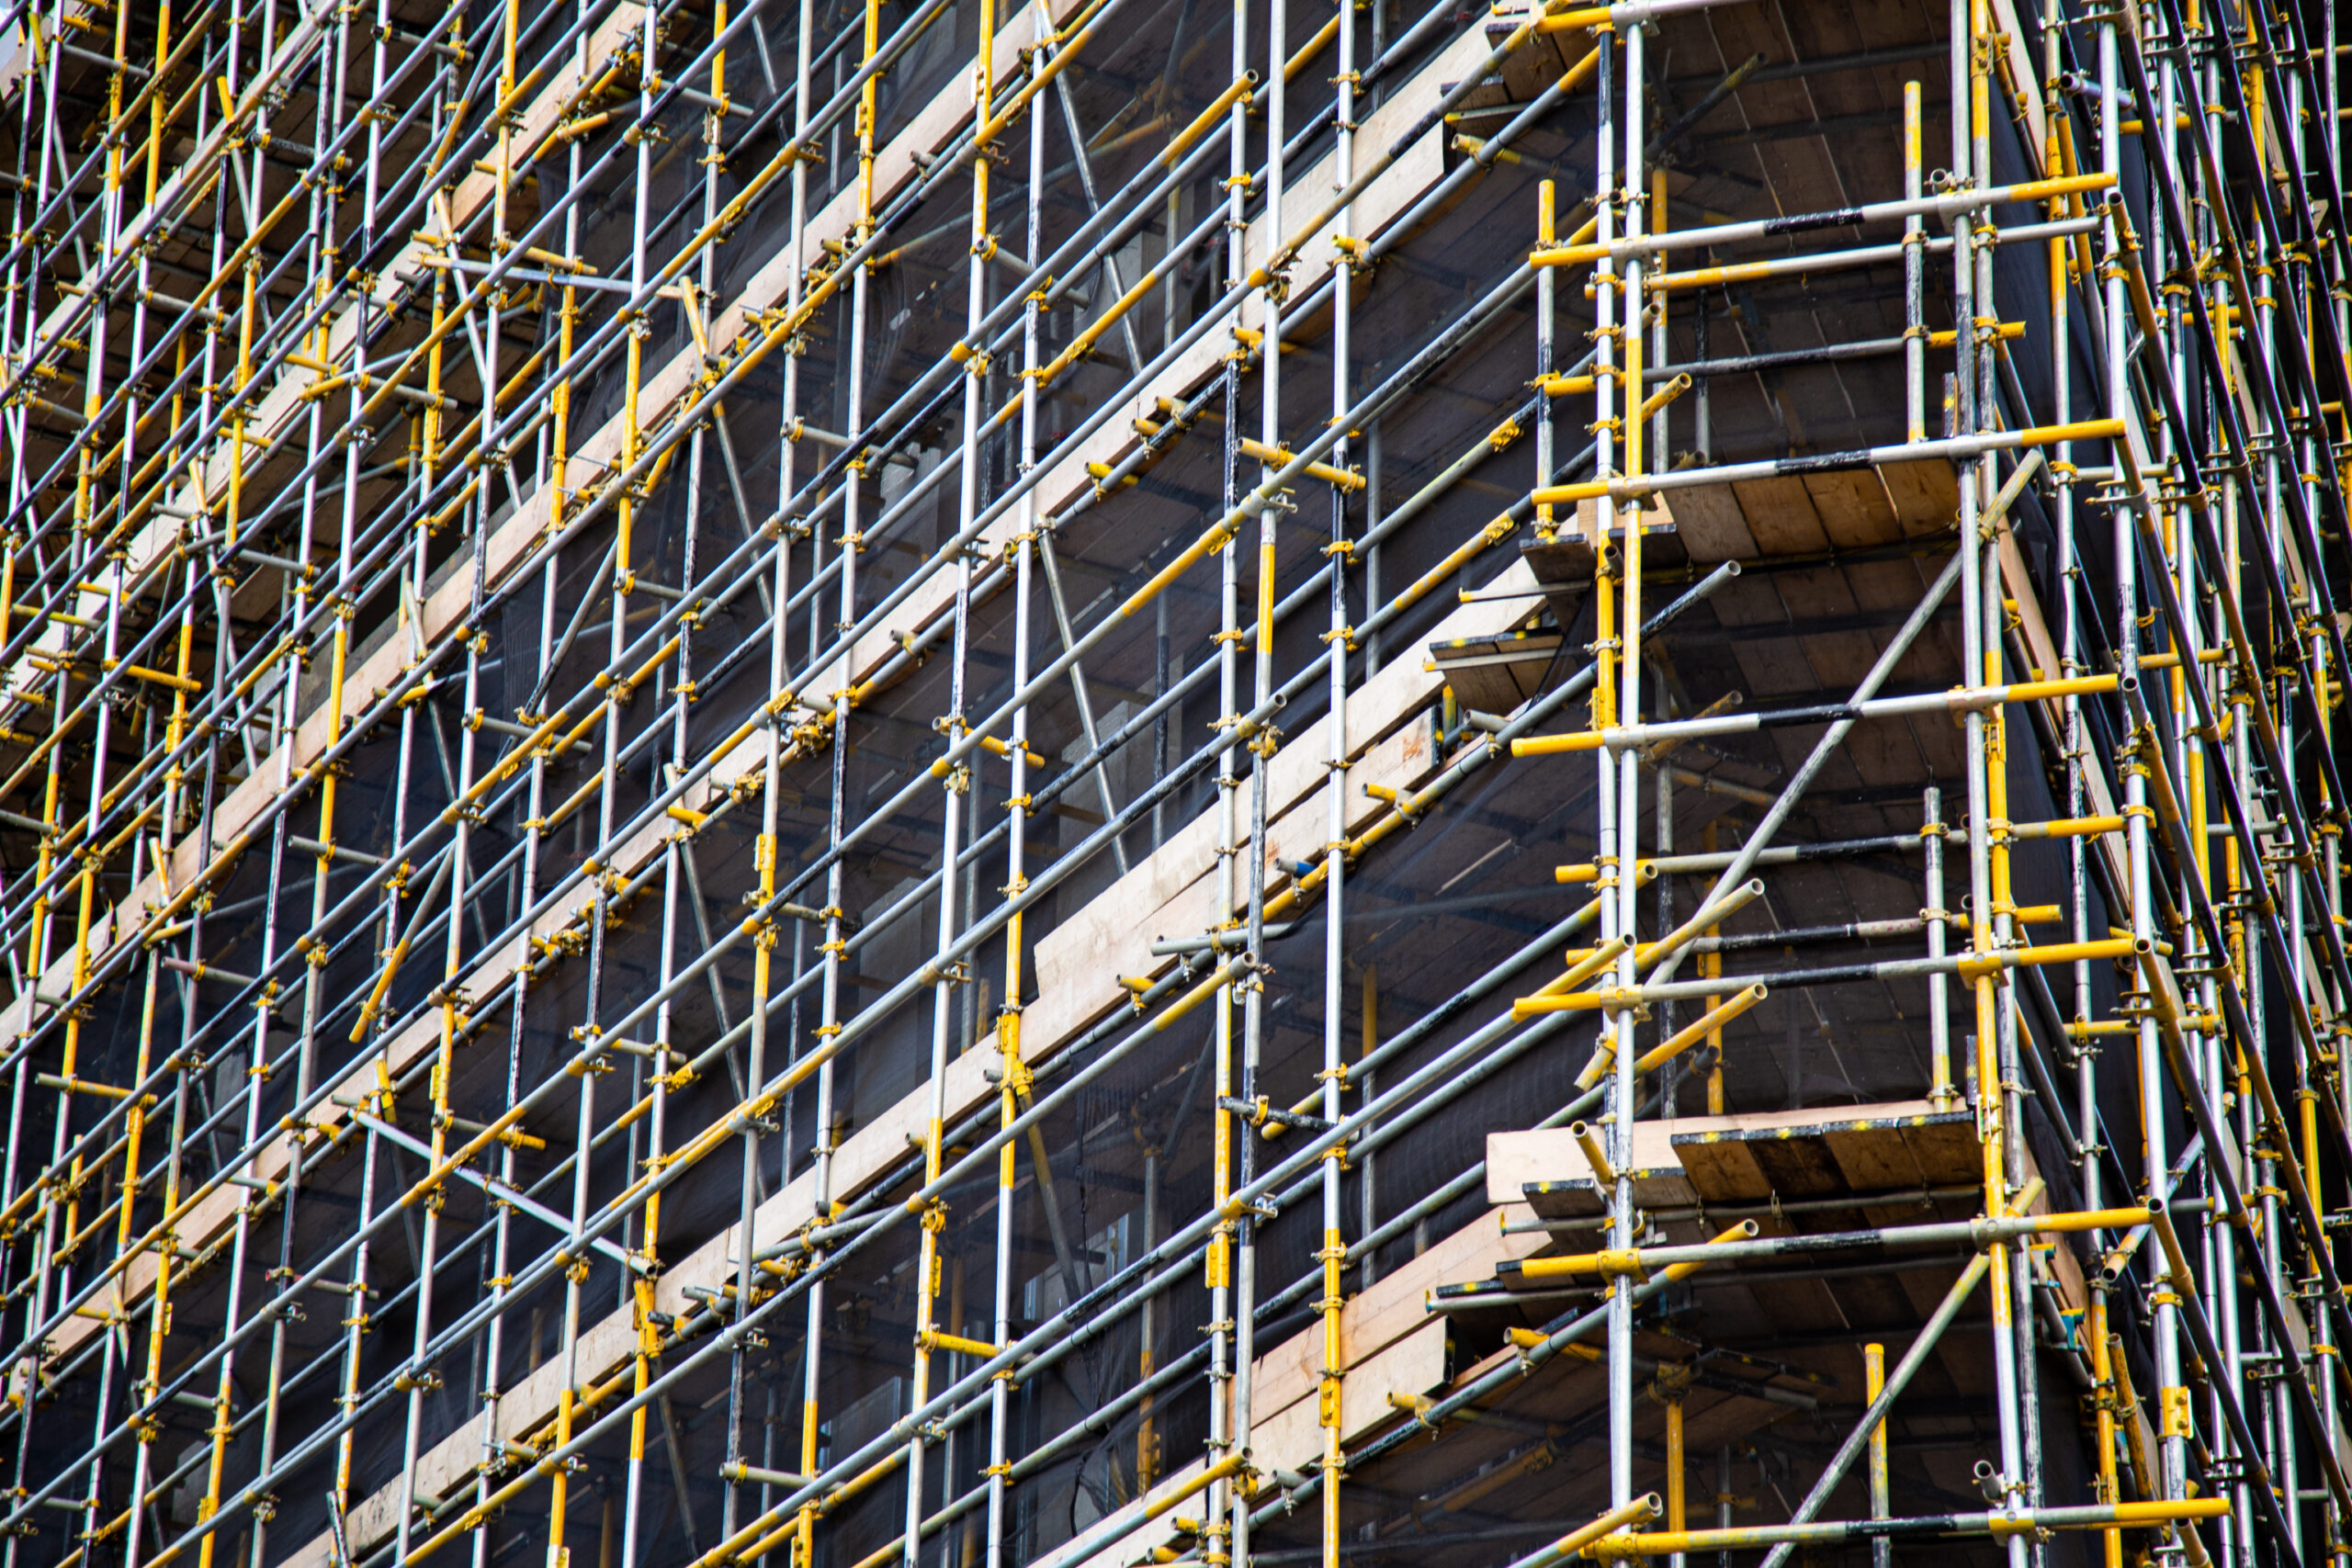 Scaffolding around the structure of a building under construction.